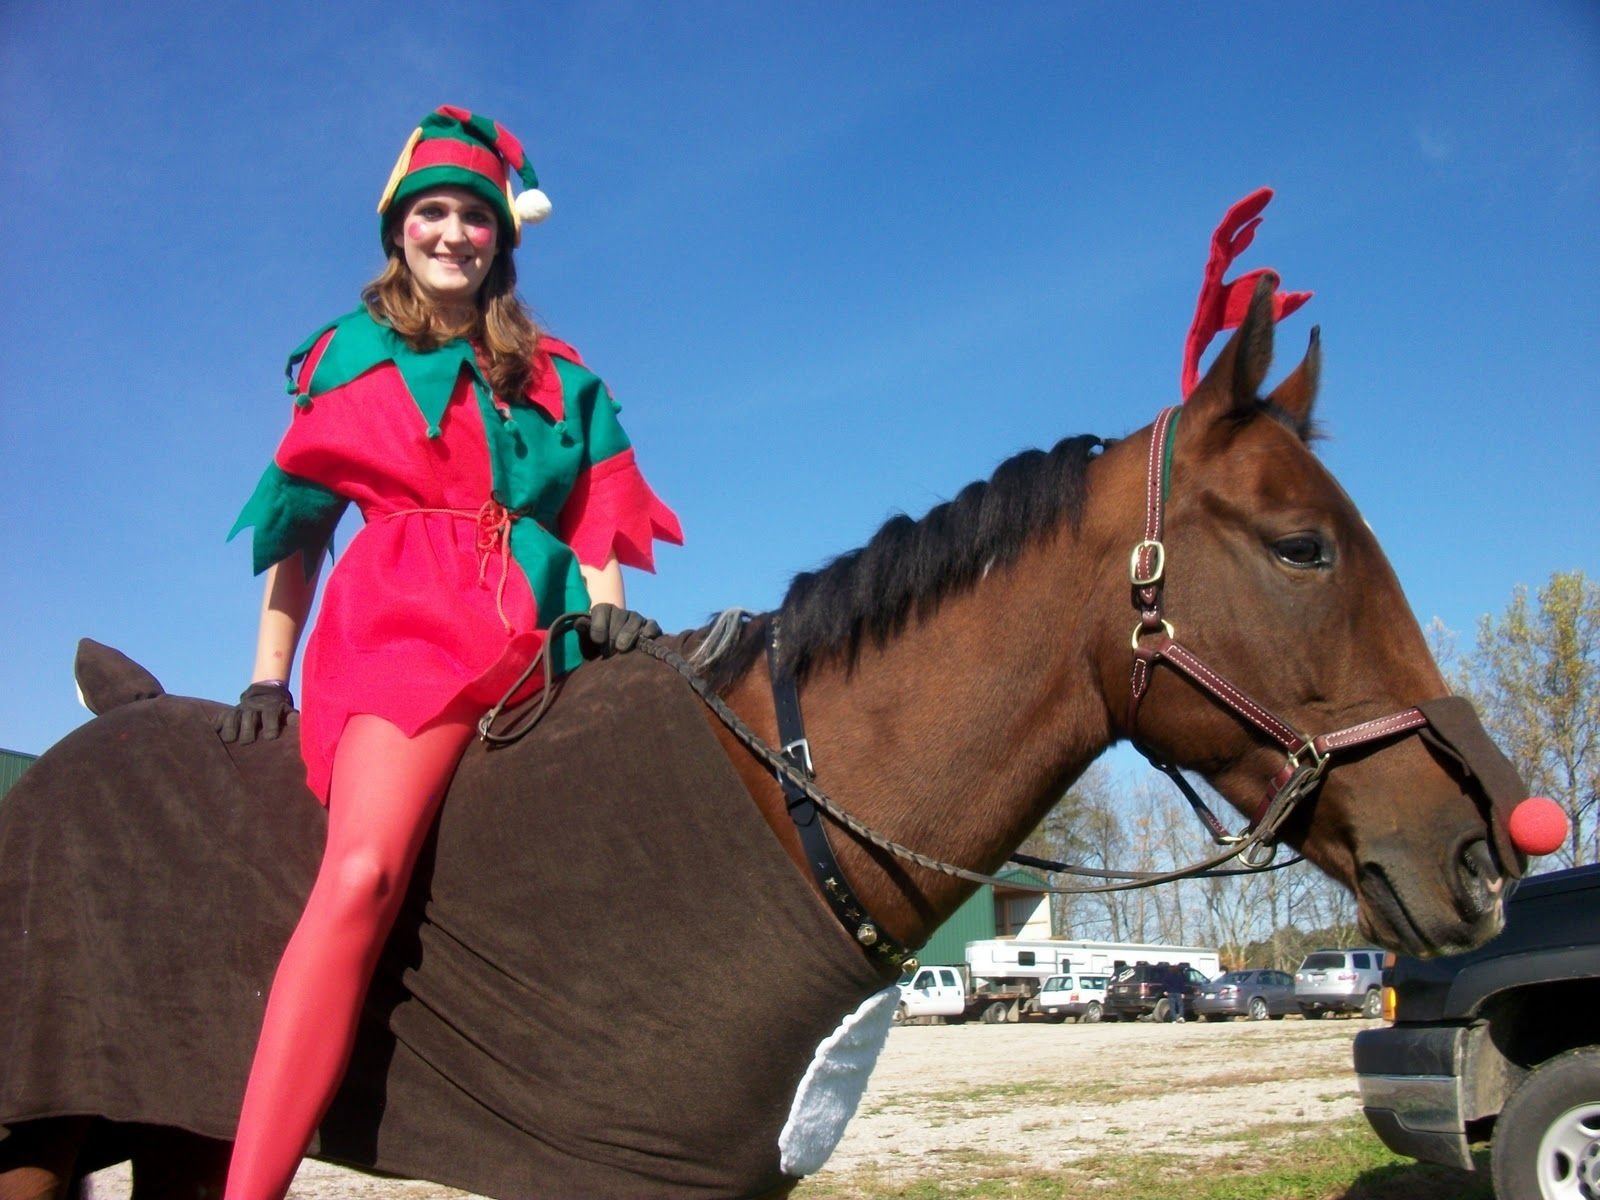 10 Spectacular Horse And Rider Costume Ideas horse and rider costume ideas pick crazy costume class rudolph 2022